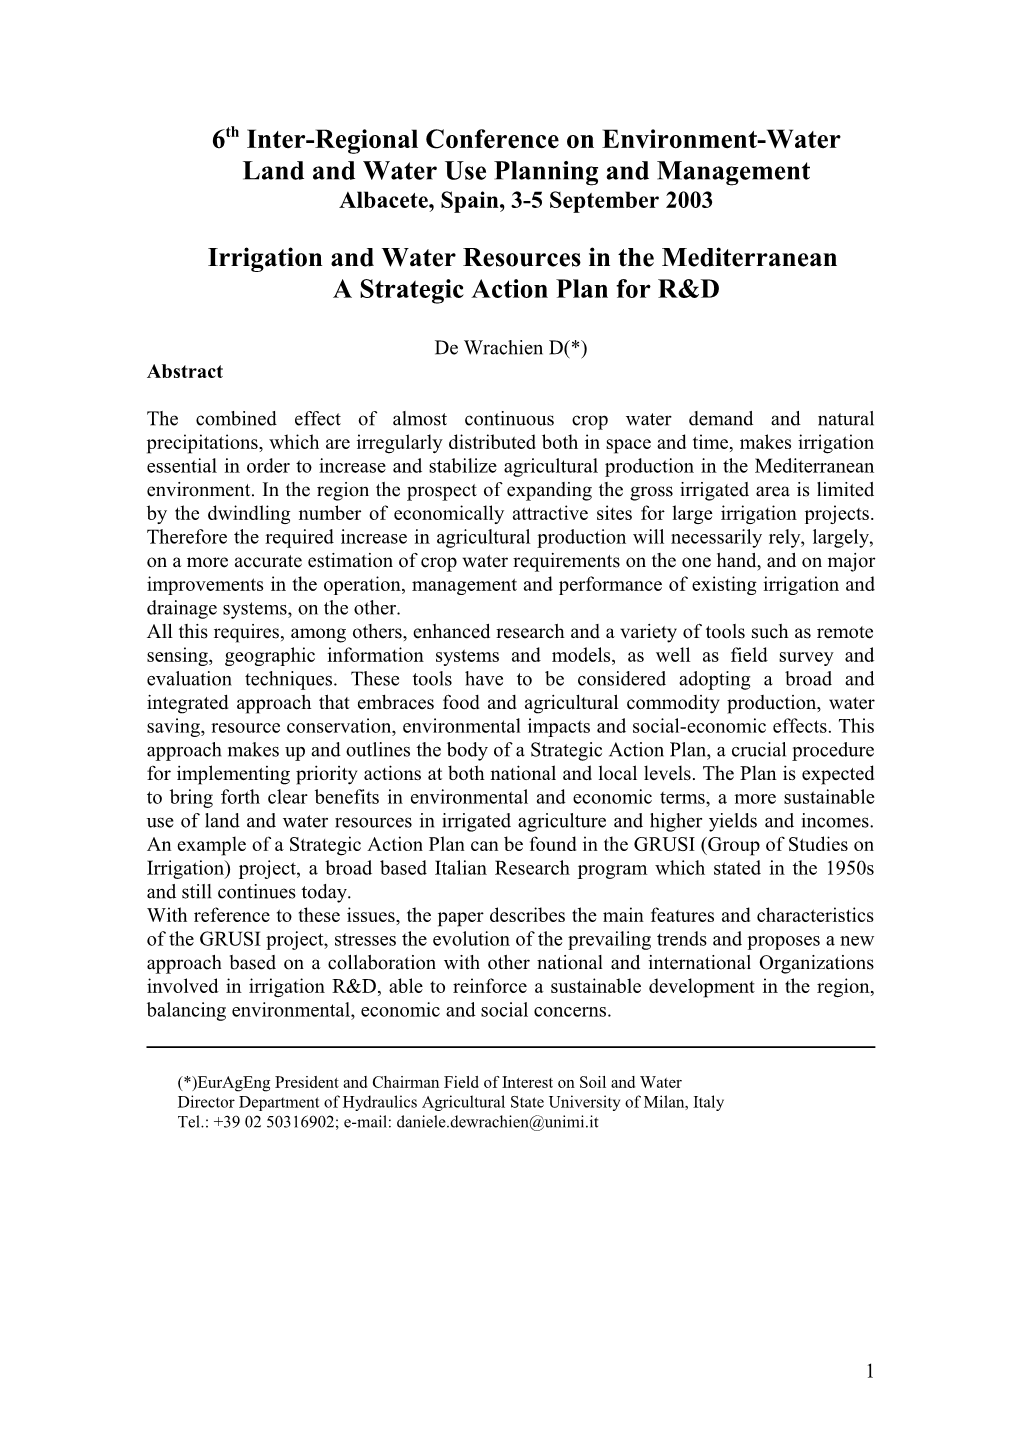 Irrigation and Water Resources in the Mediterranean